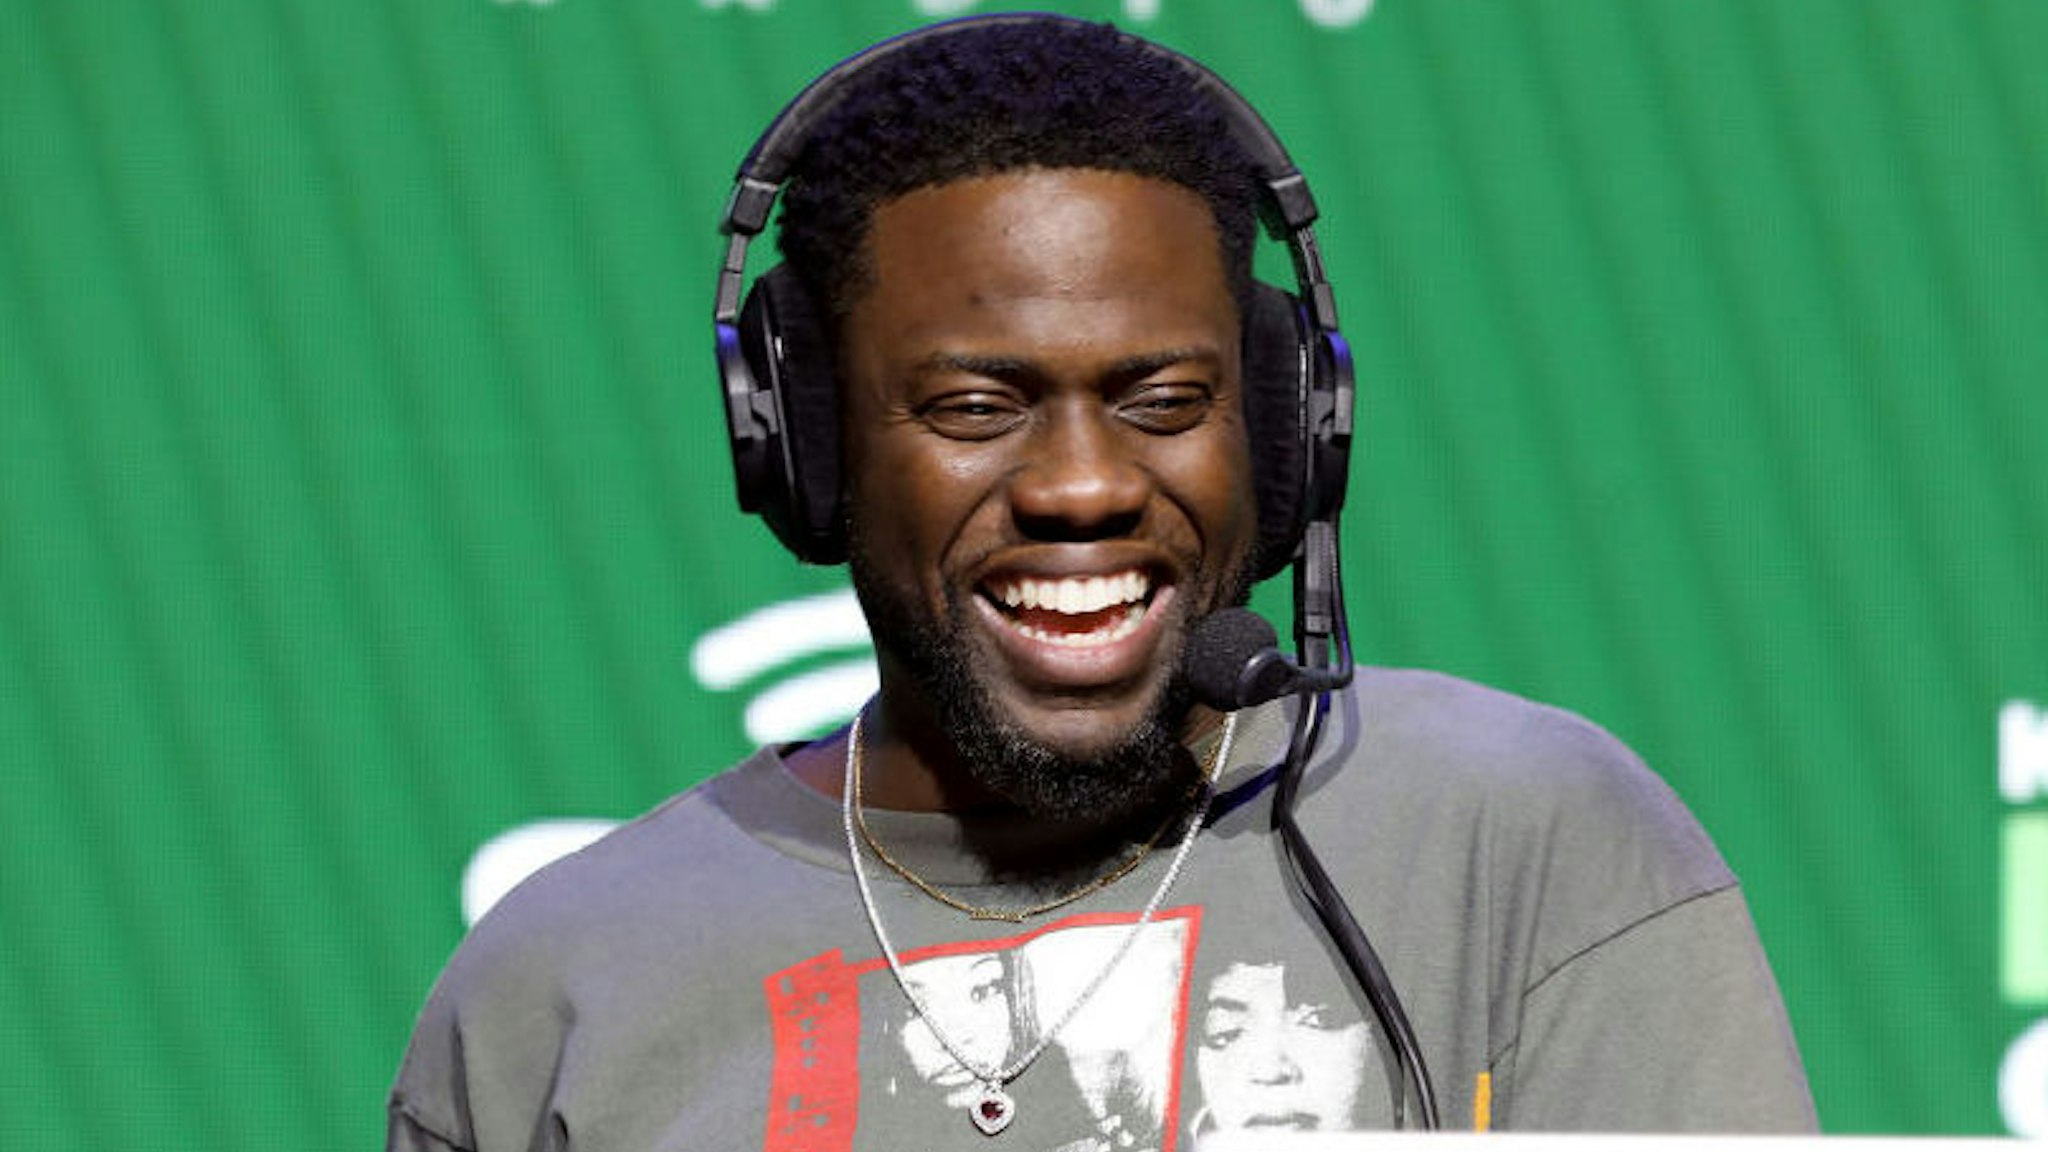 SiriusXM host Kevin Hart speaks onstage during day 3 of SiriusXM at Super Bowl LIV on January 31, 2020 in Miami, Florida.